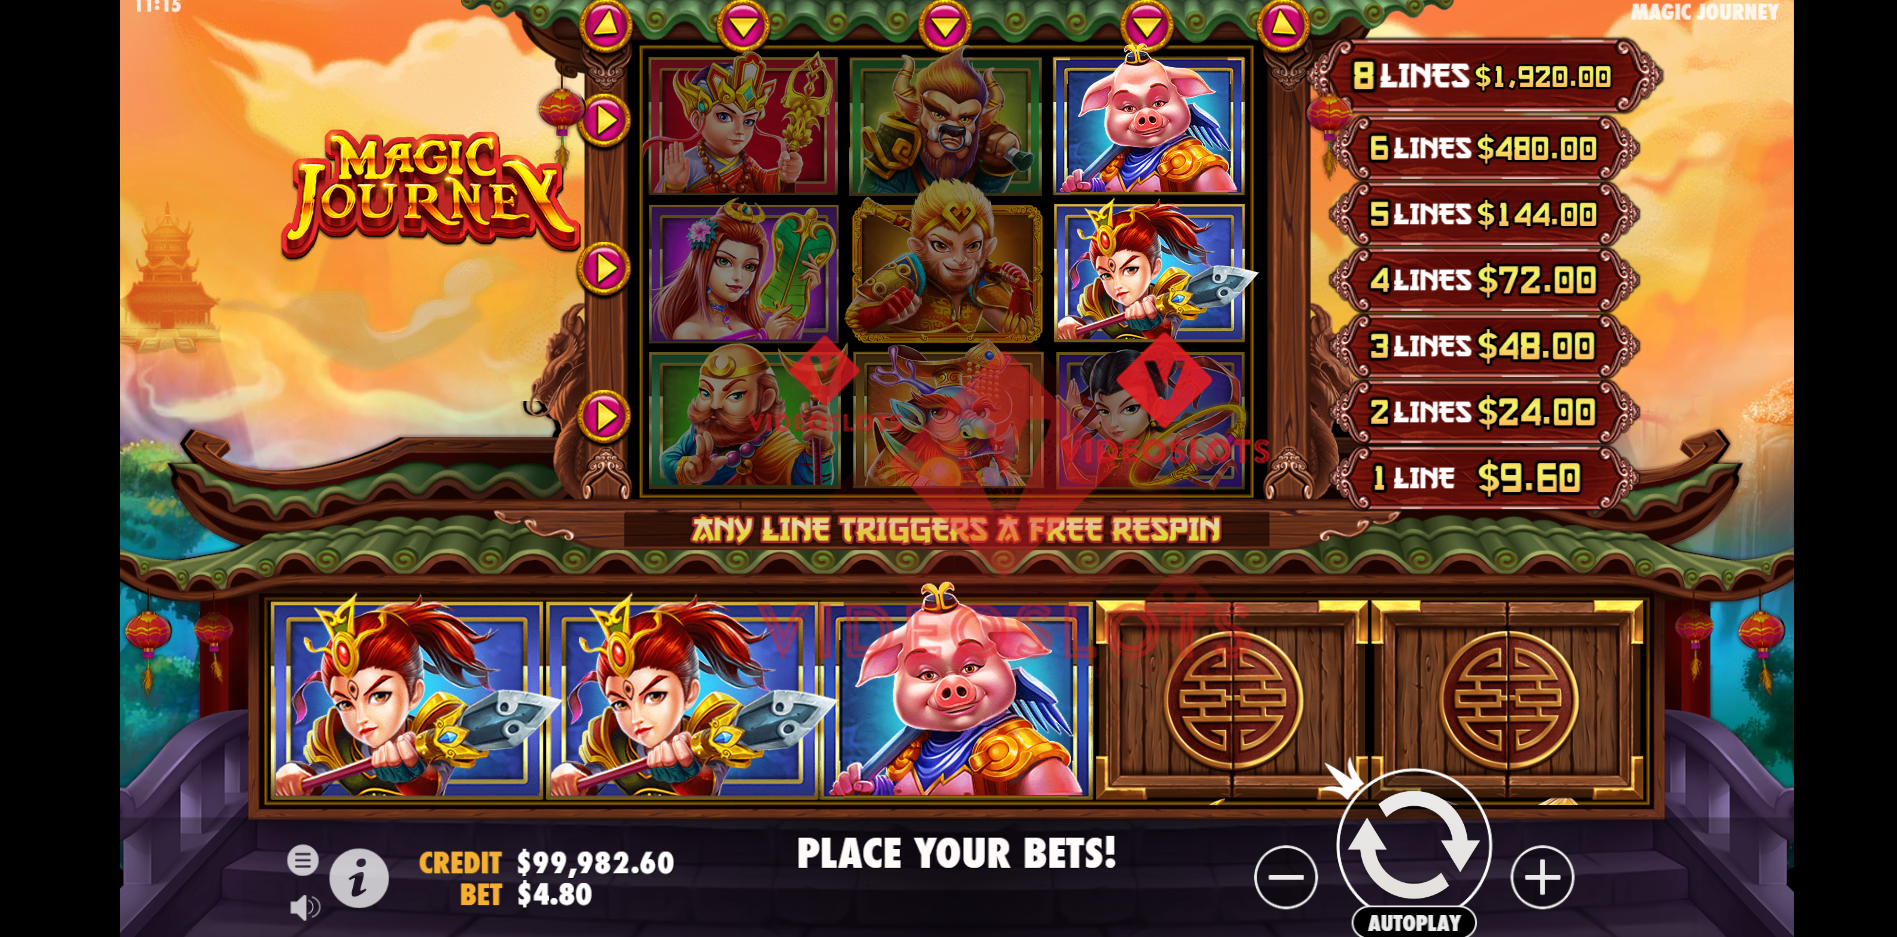 Base Game for Magic Journey slot by Pragmatic Play